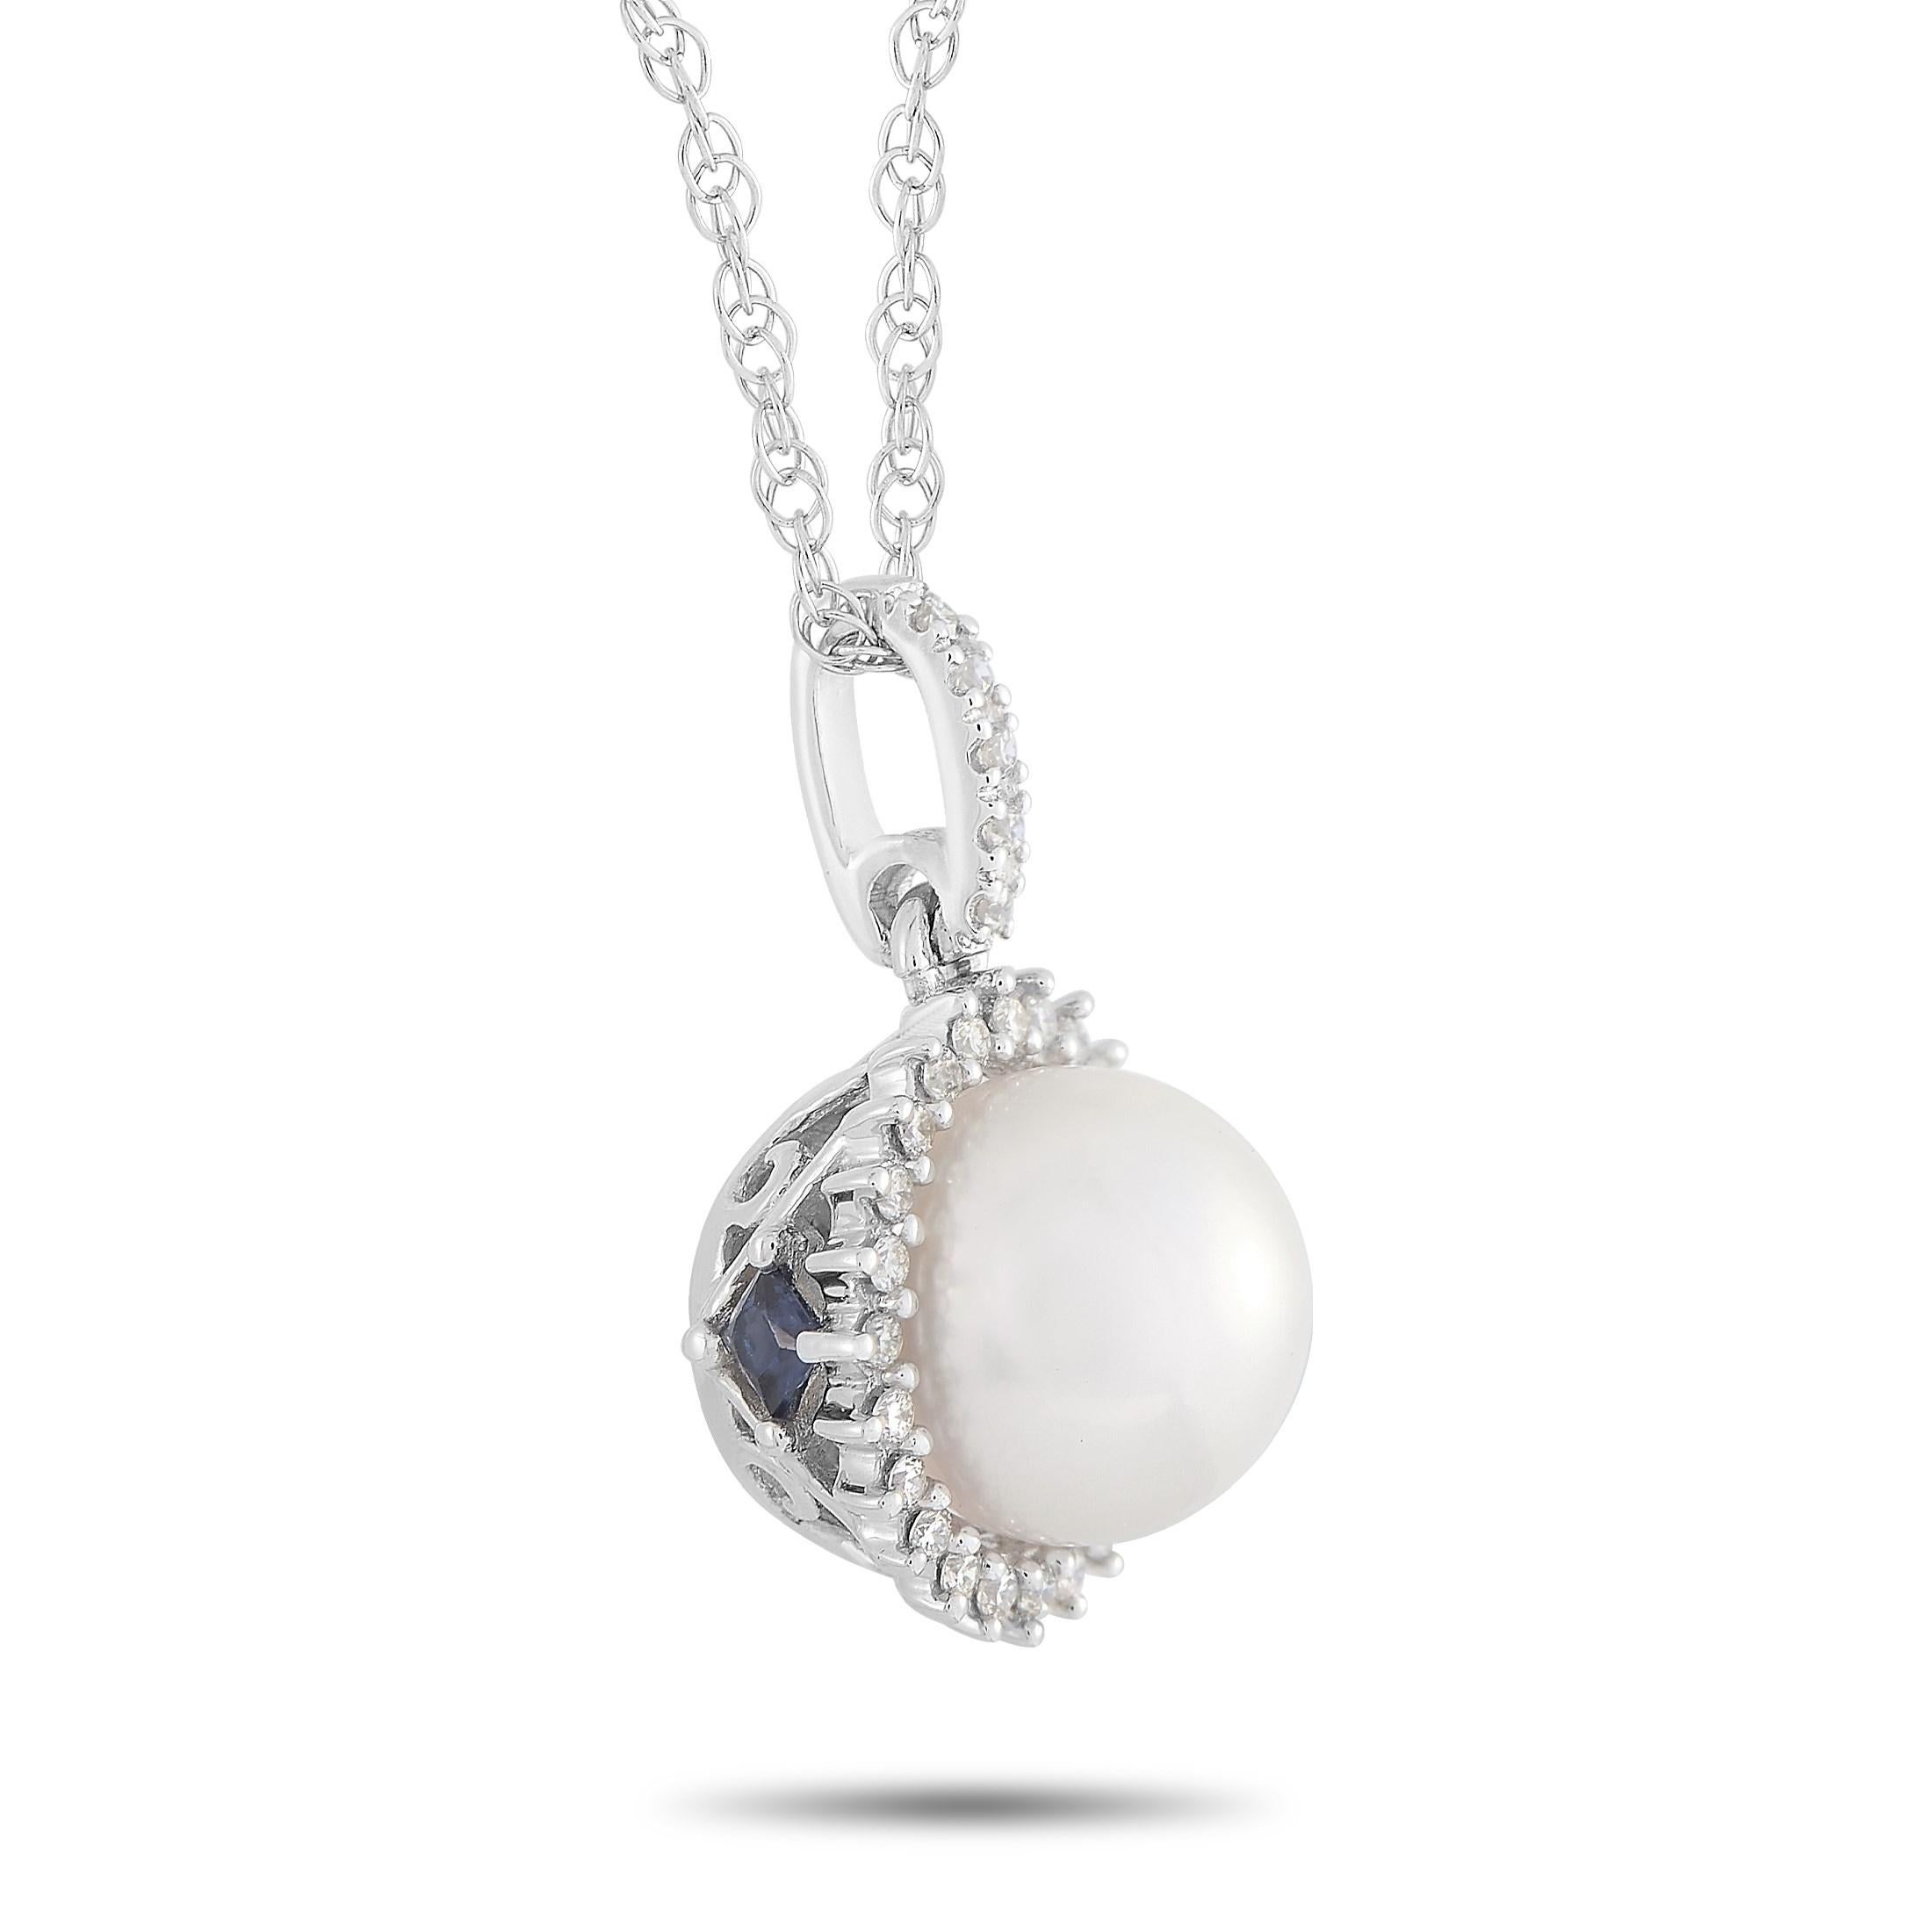 This LB Exclusive 14K White Gold 0.12 ct Diamond and 0.12 ct Sapphire and Pearl Pendant Necklace features a delicate 14K White Gold chain measuring 18 inches in length. The necklace features a round pendant set with 0.12 carats of round-cut